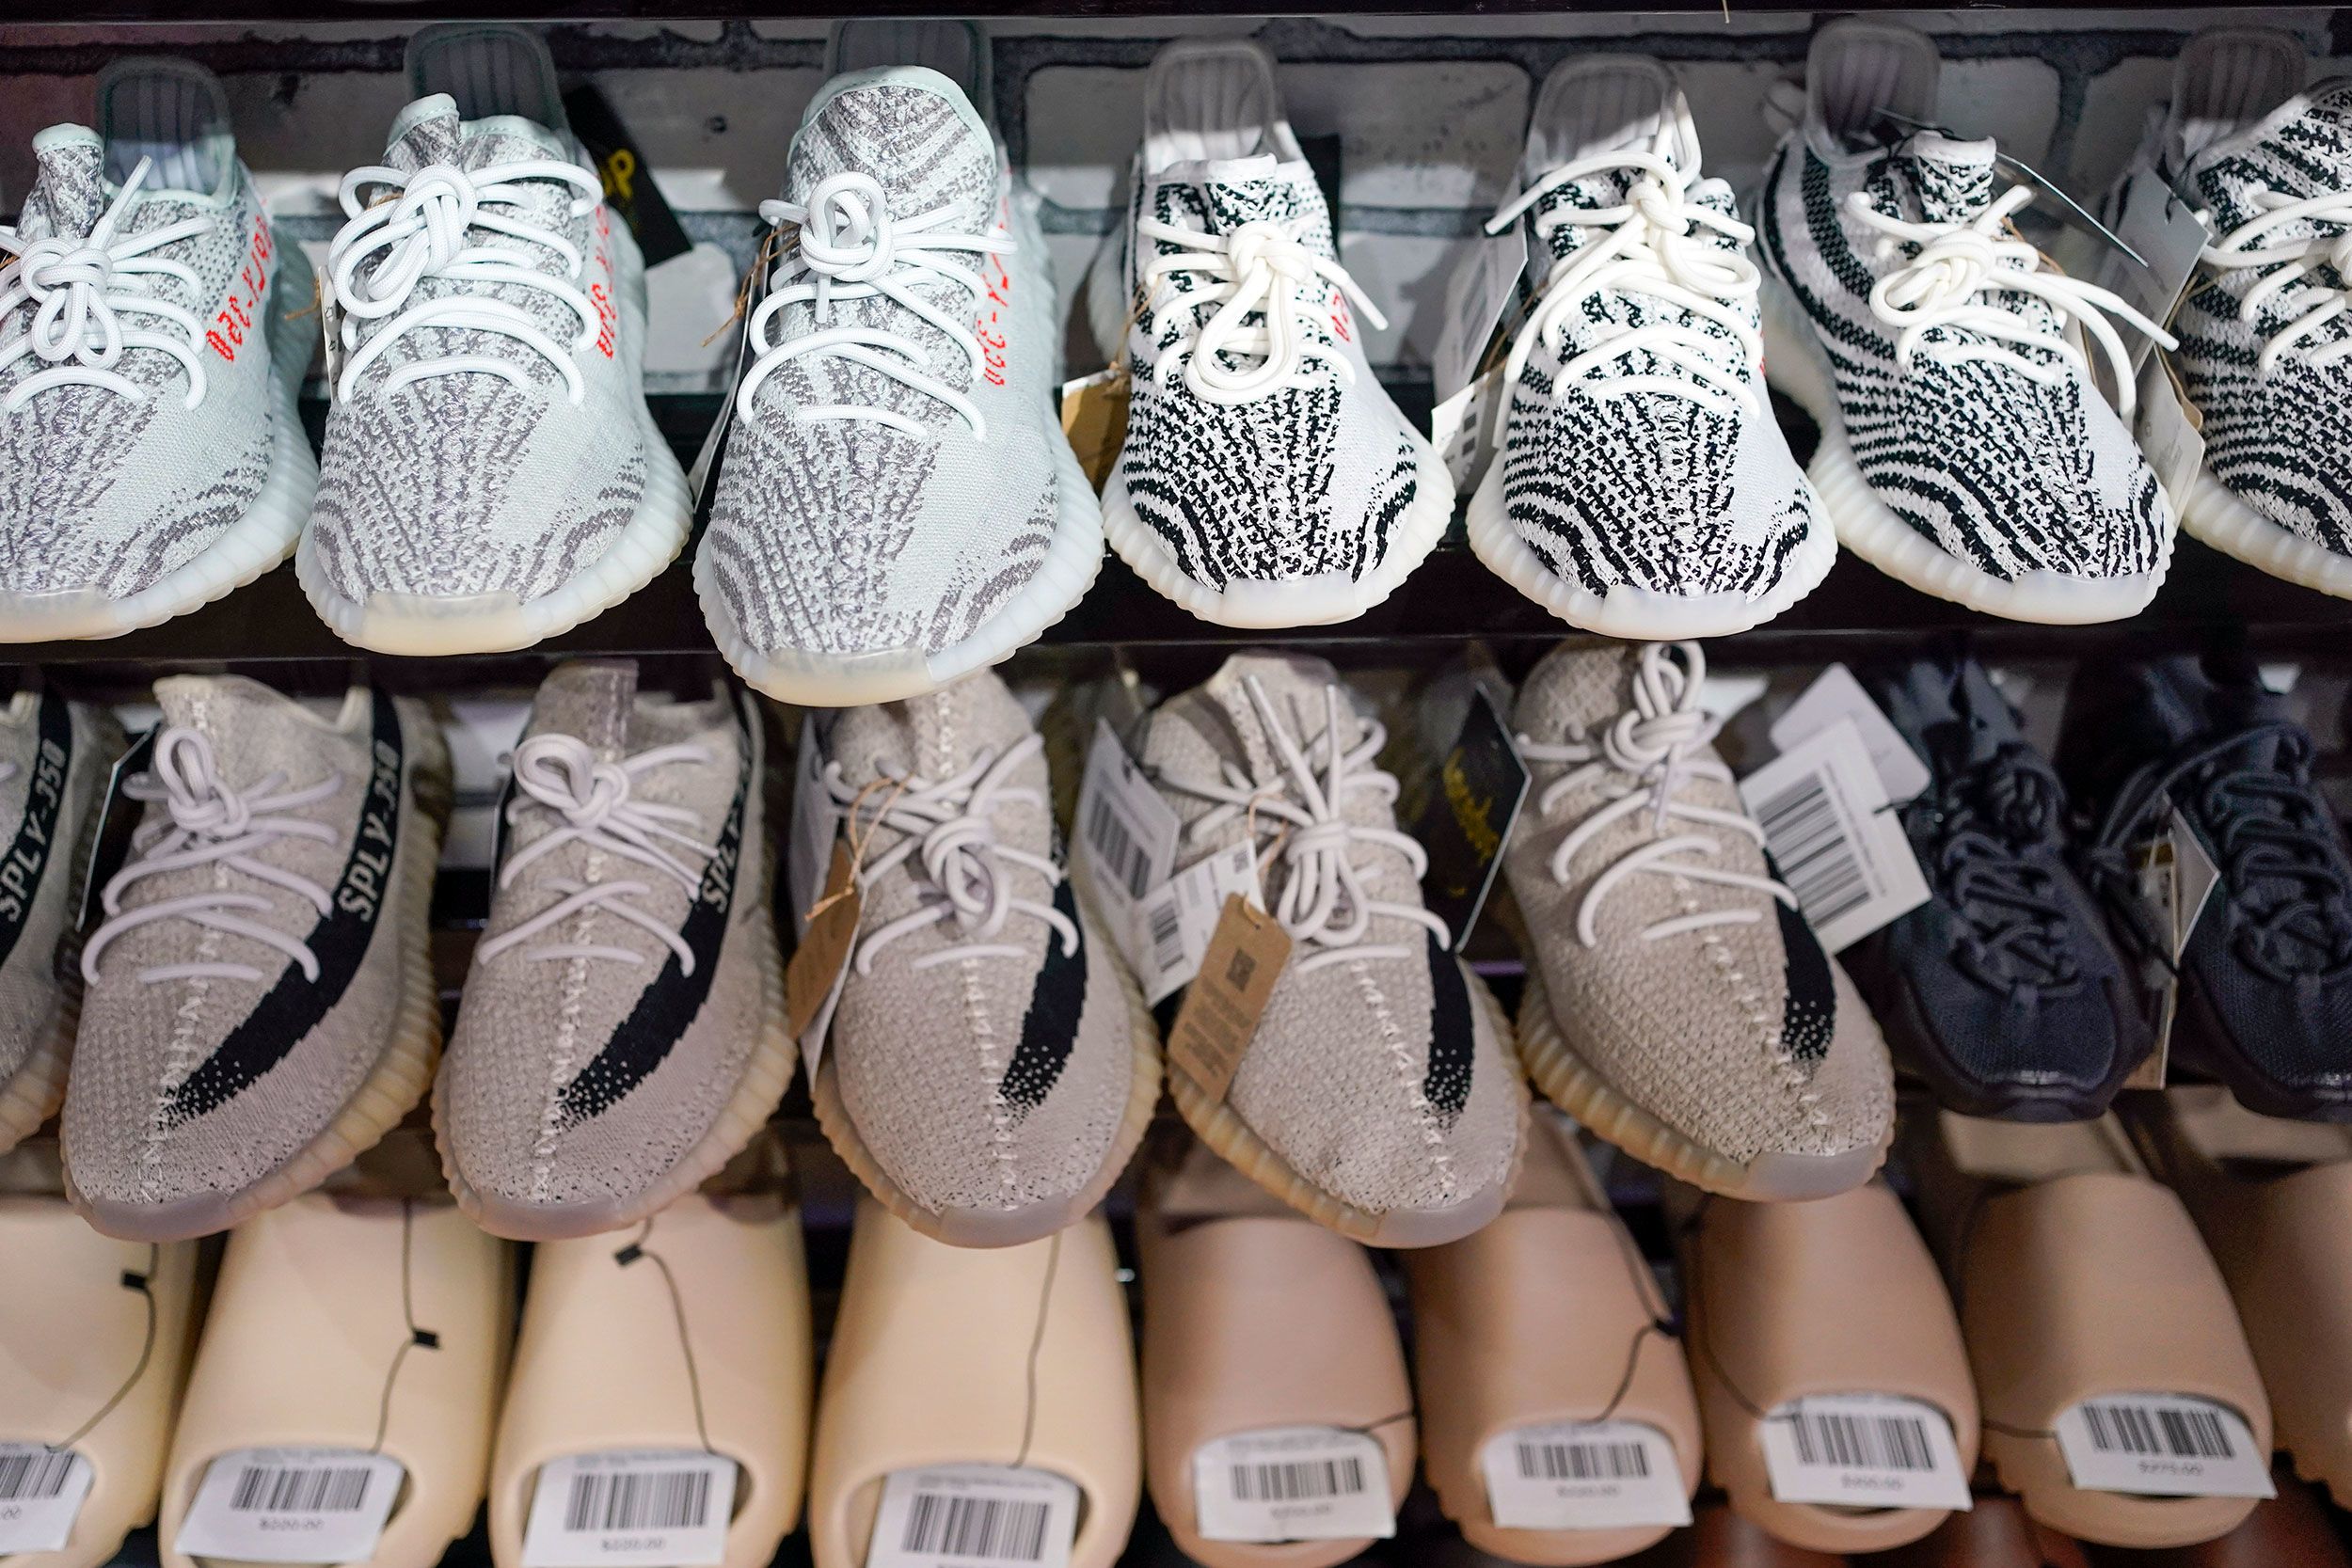 Tina Cuestiones diplomáticas Personas con discapacidad auditiva Adidas says dropping Kanye West could cost it more than $1 billion in sales  | CNN Business